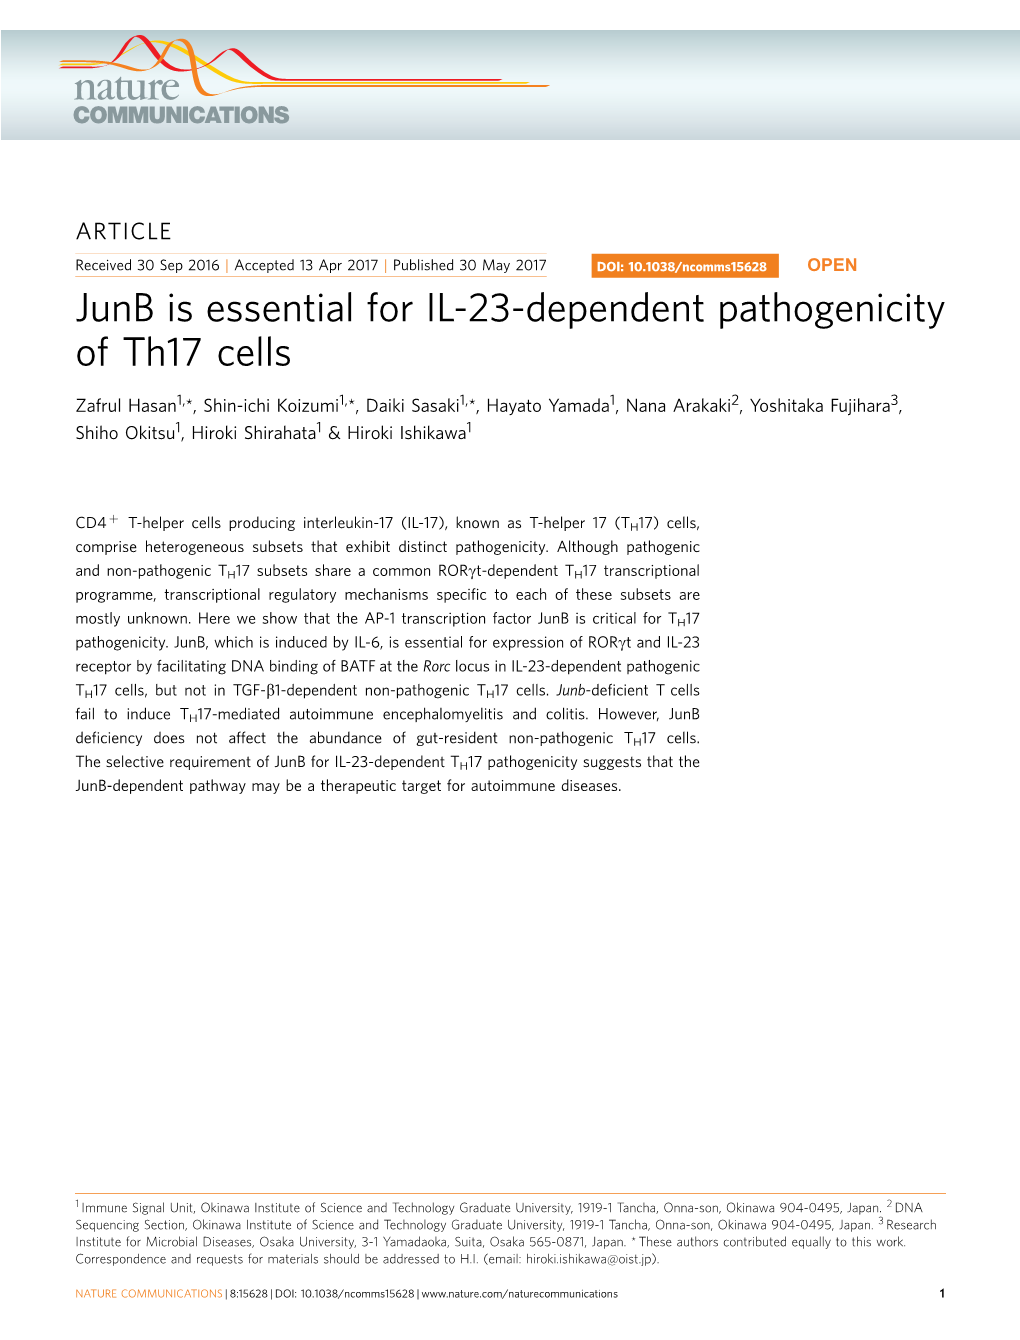 Junb Is Essential for IL-23-Dependent Pathogenicity of Th17 Cells